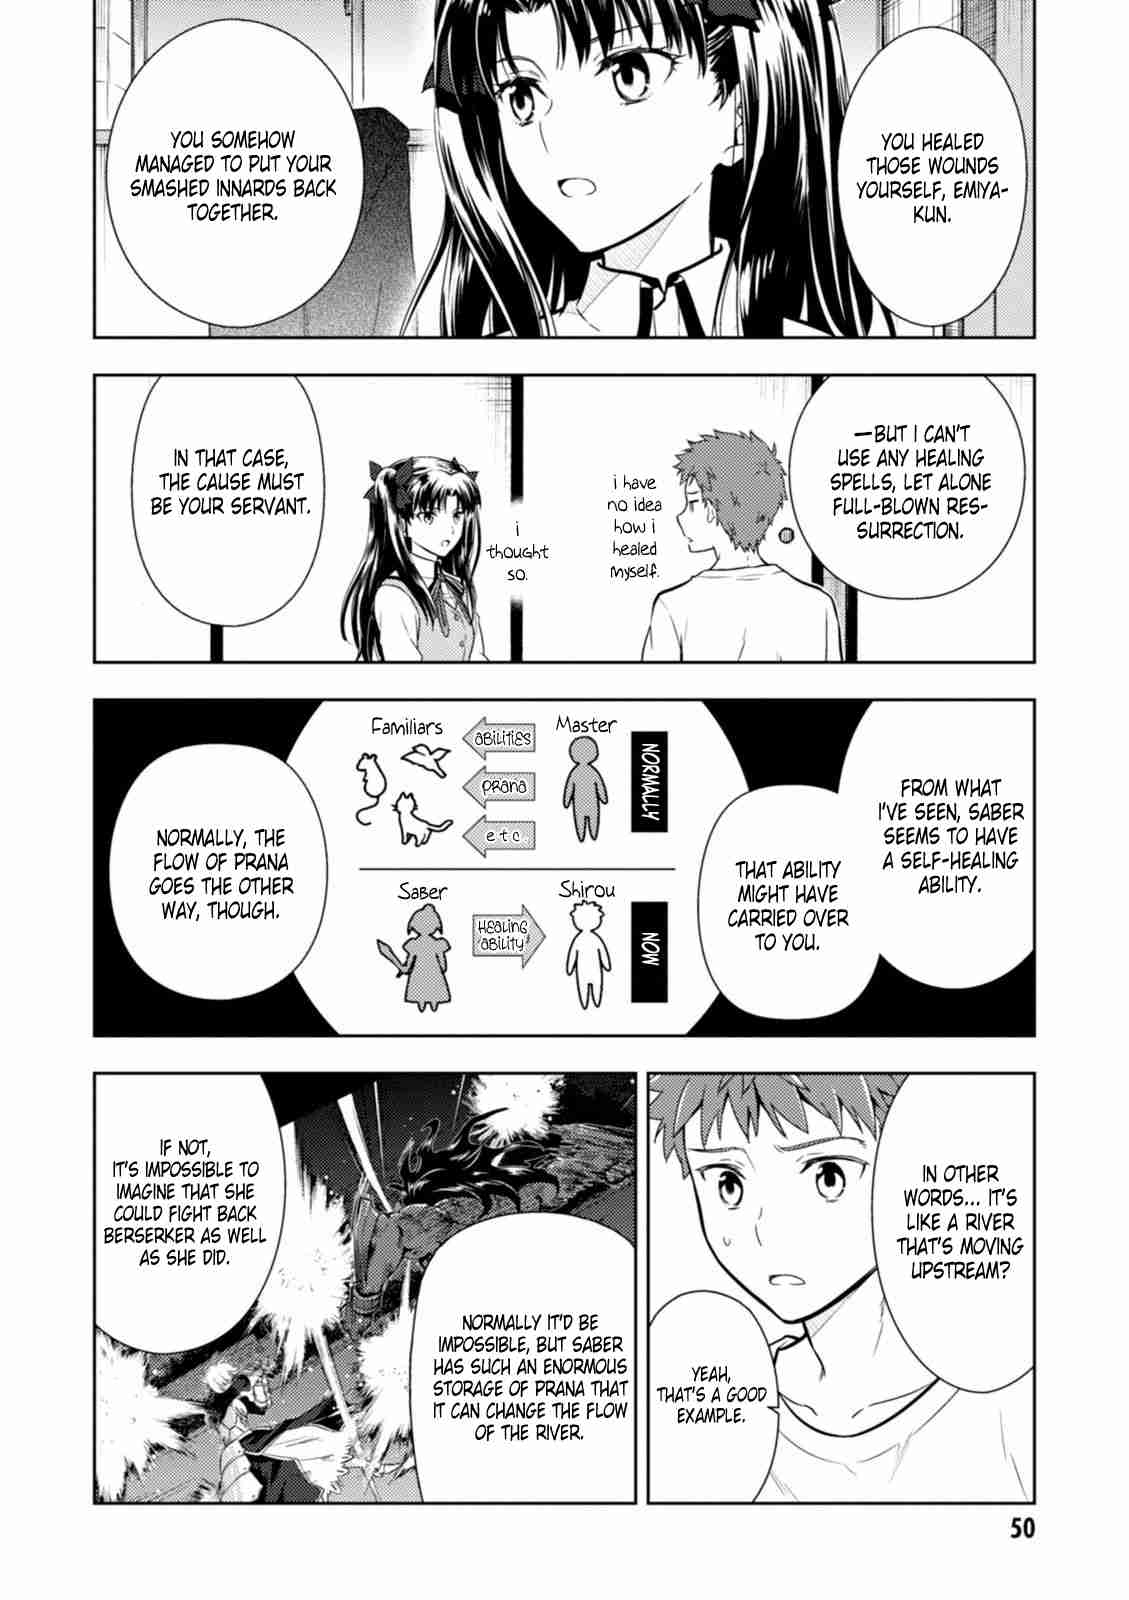 Fate/stay night: Heaven's Feel Ch. 12 Day 4 / The Holy Grail War and Its Origins (1)